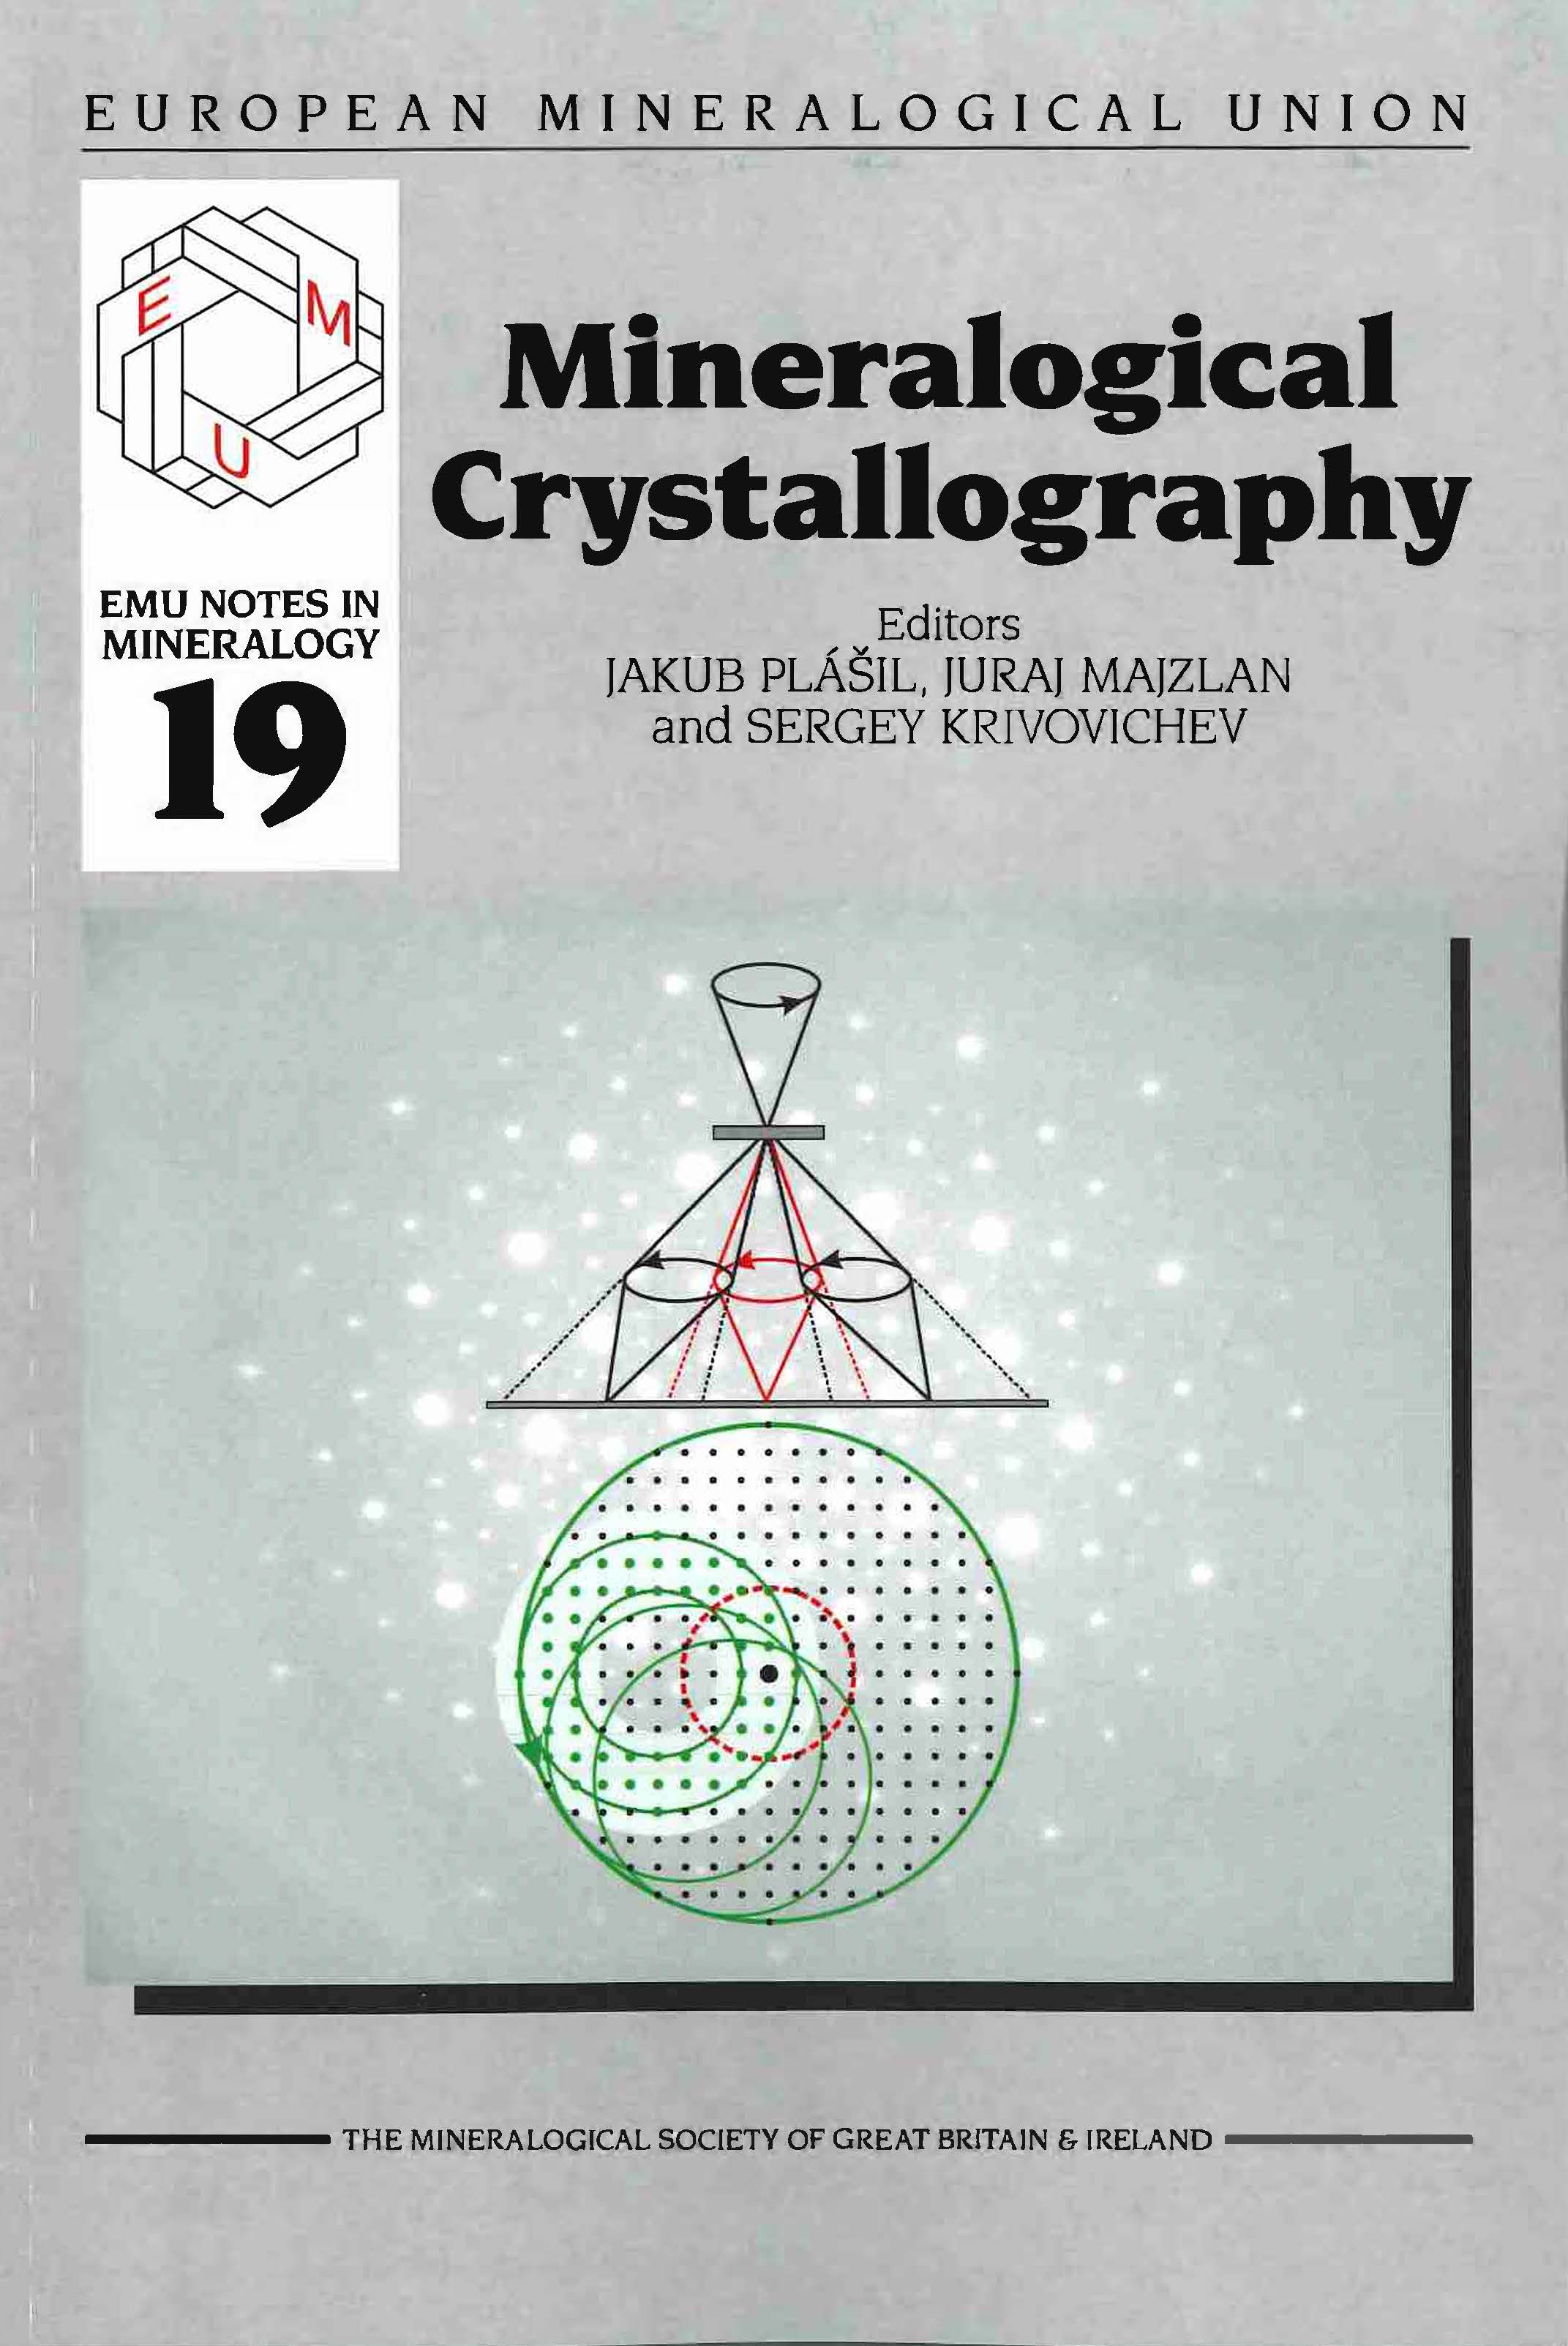 Mineralogical Crystallography